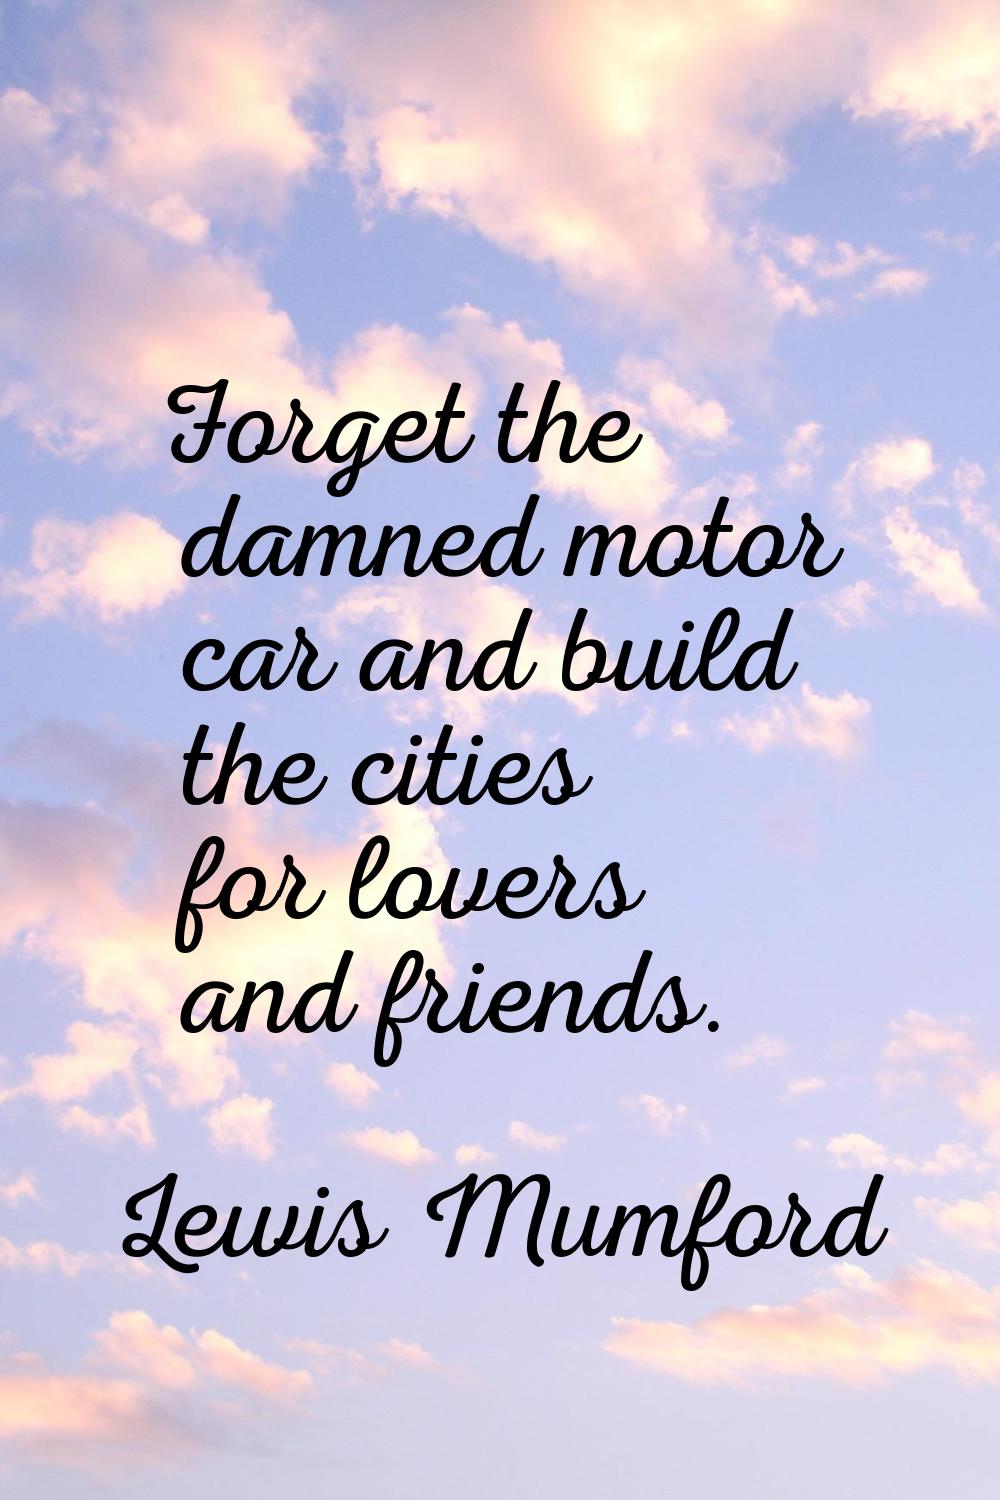 Forget the damned motor car and build the cities for lovers and friends.